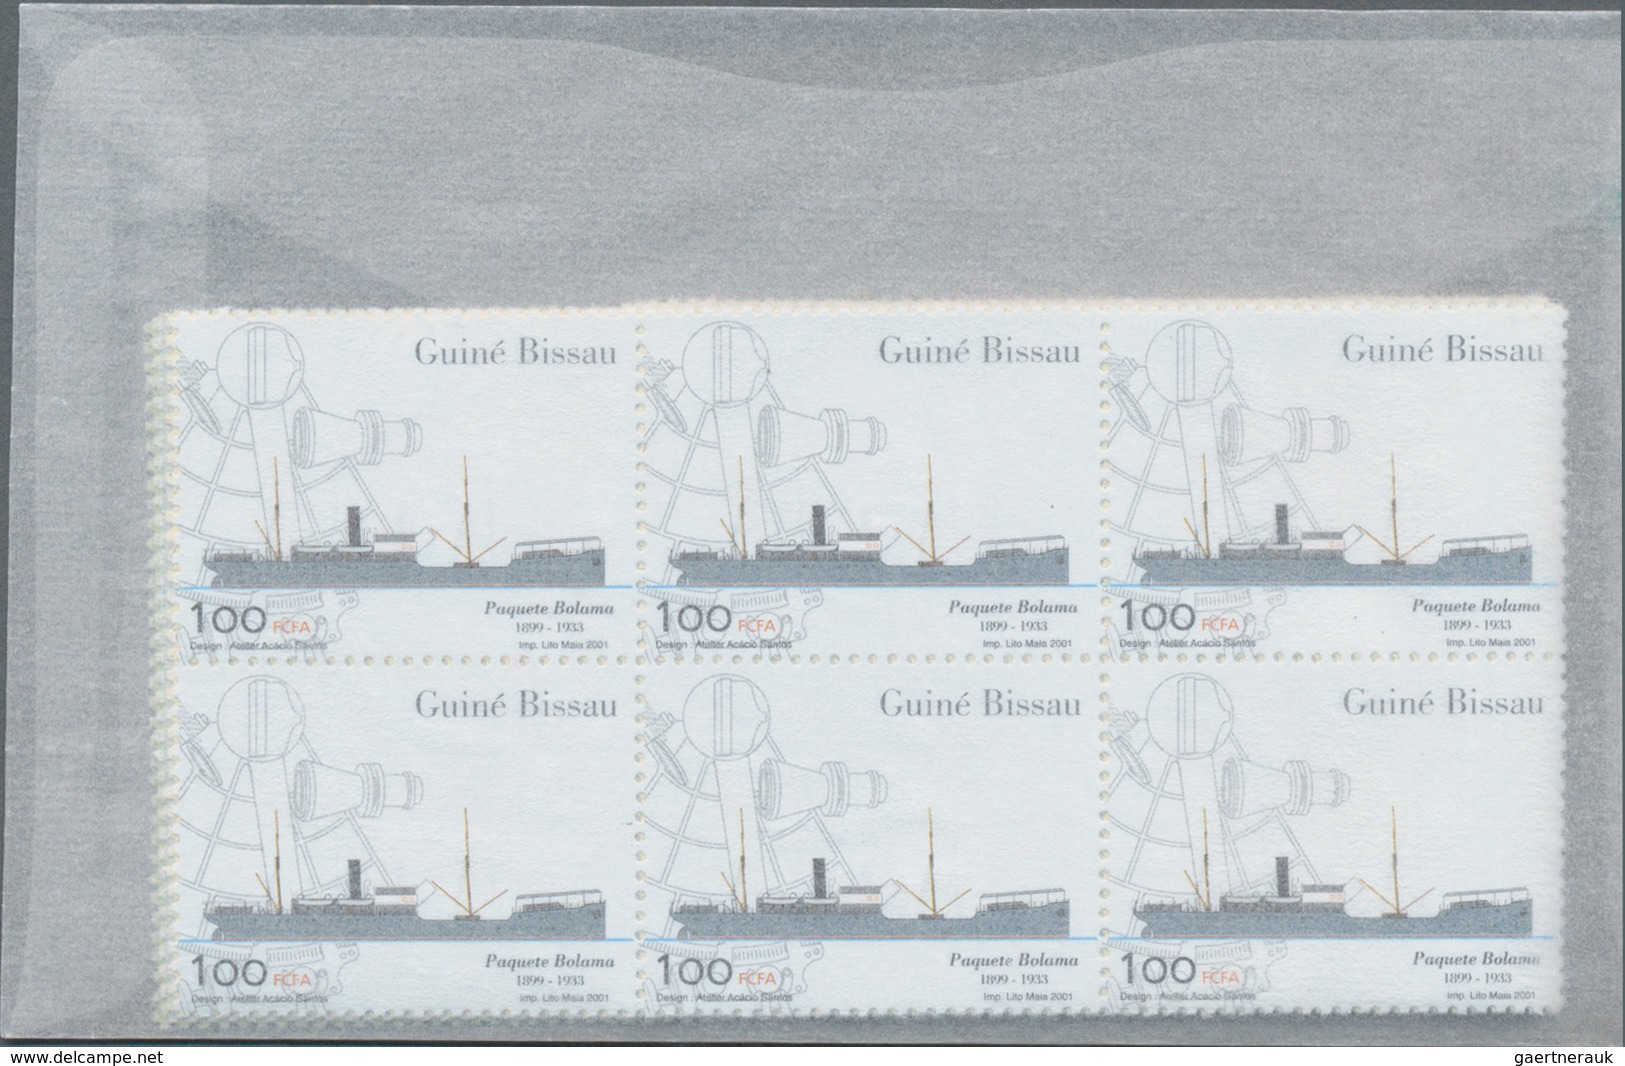 Guinea-Bissau: 2001/2002, stock of thousands of complete sets (often in units or sheets) and souveni